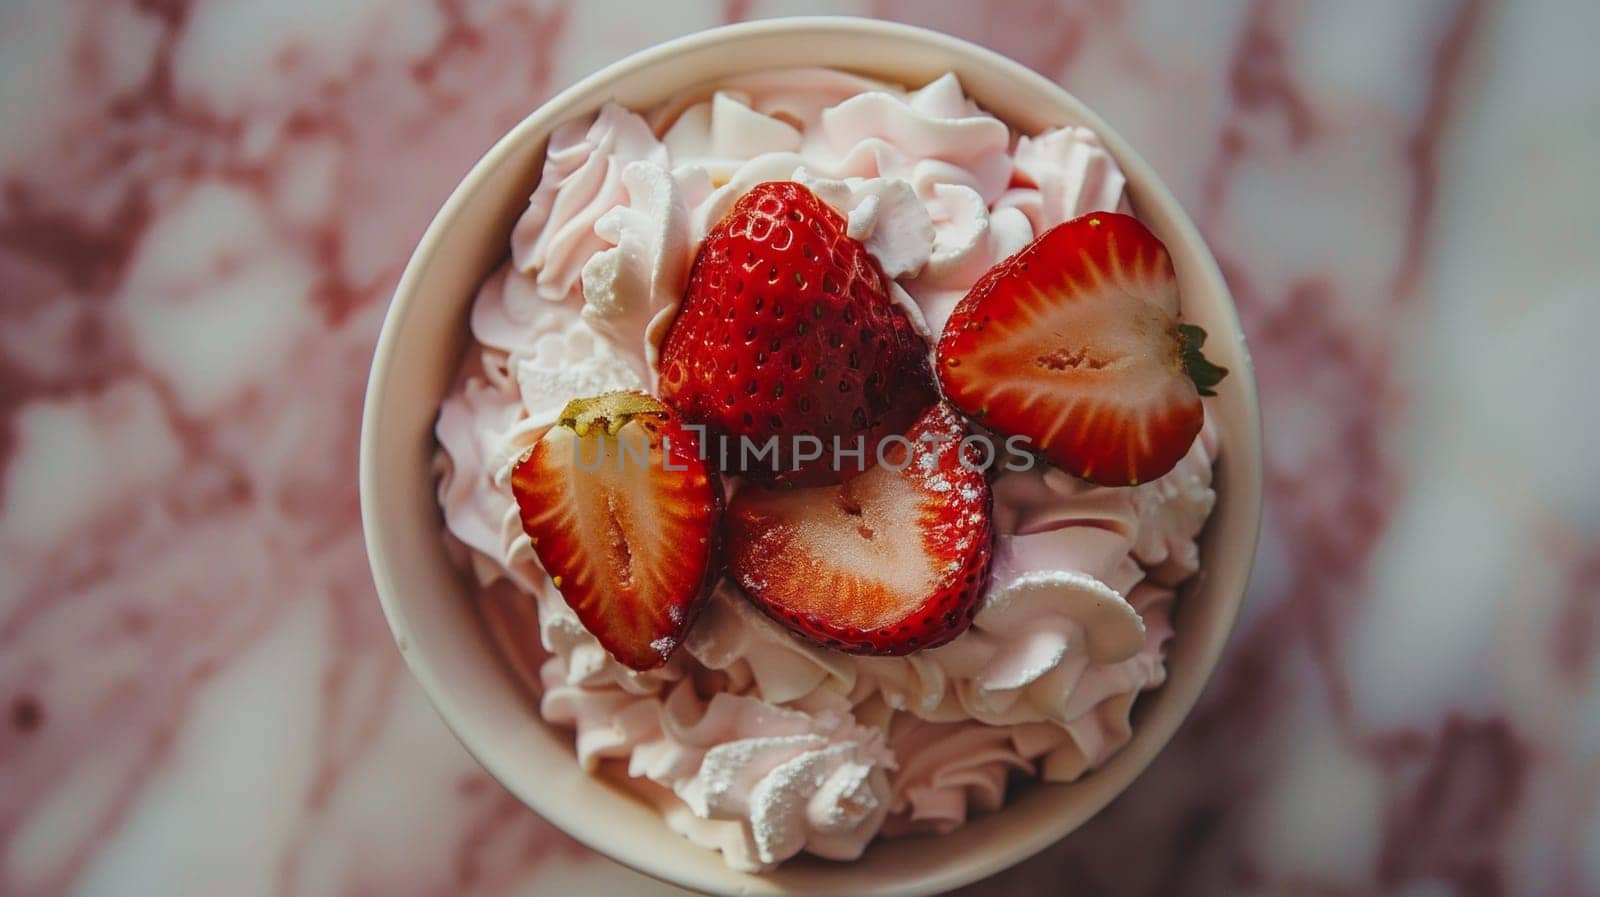 A bowl of strawberries and whipped cream on a white plate, AI by starush